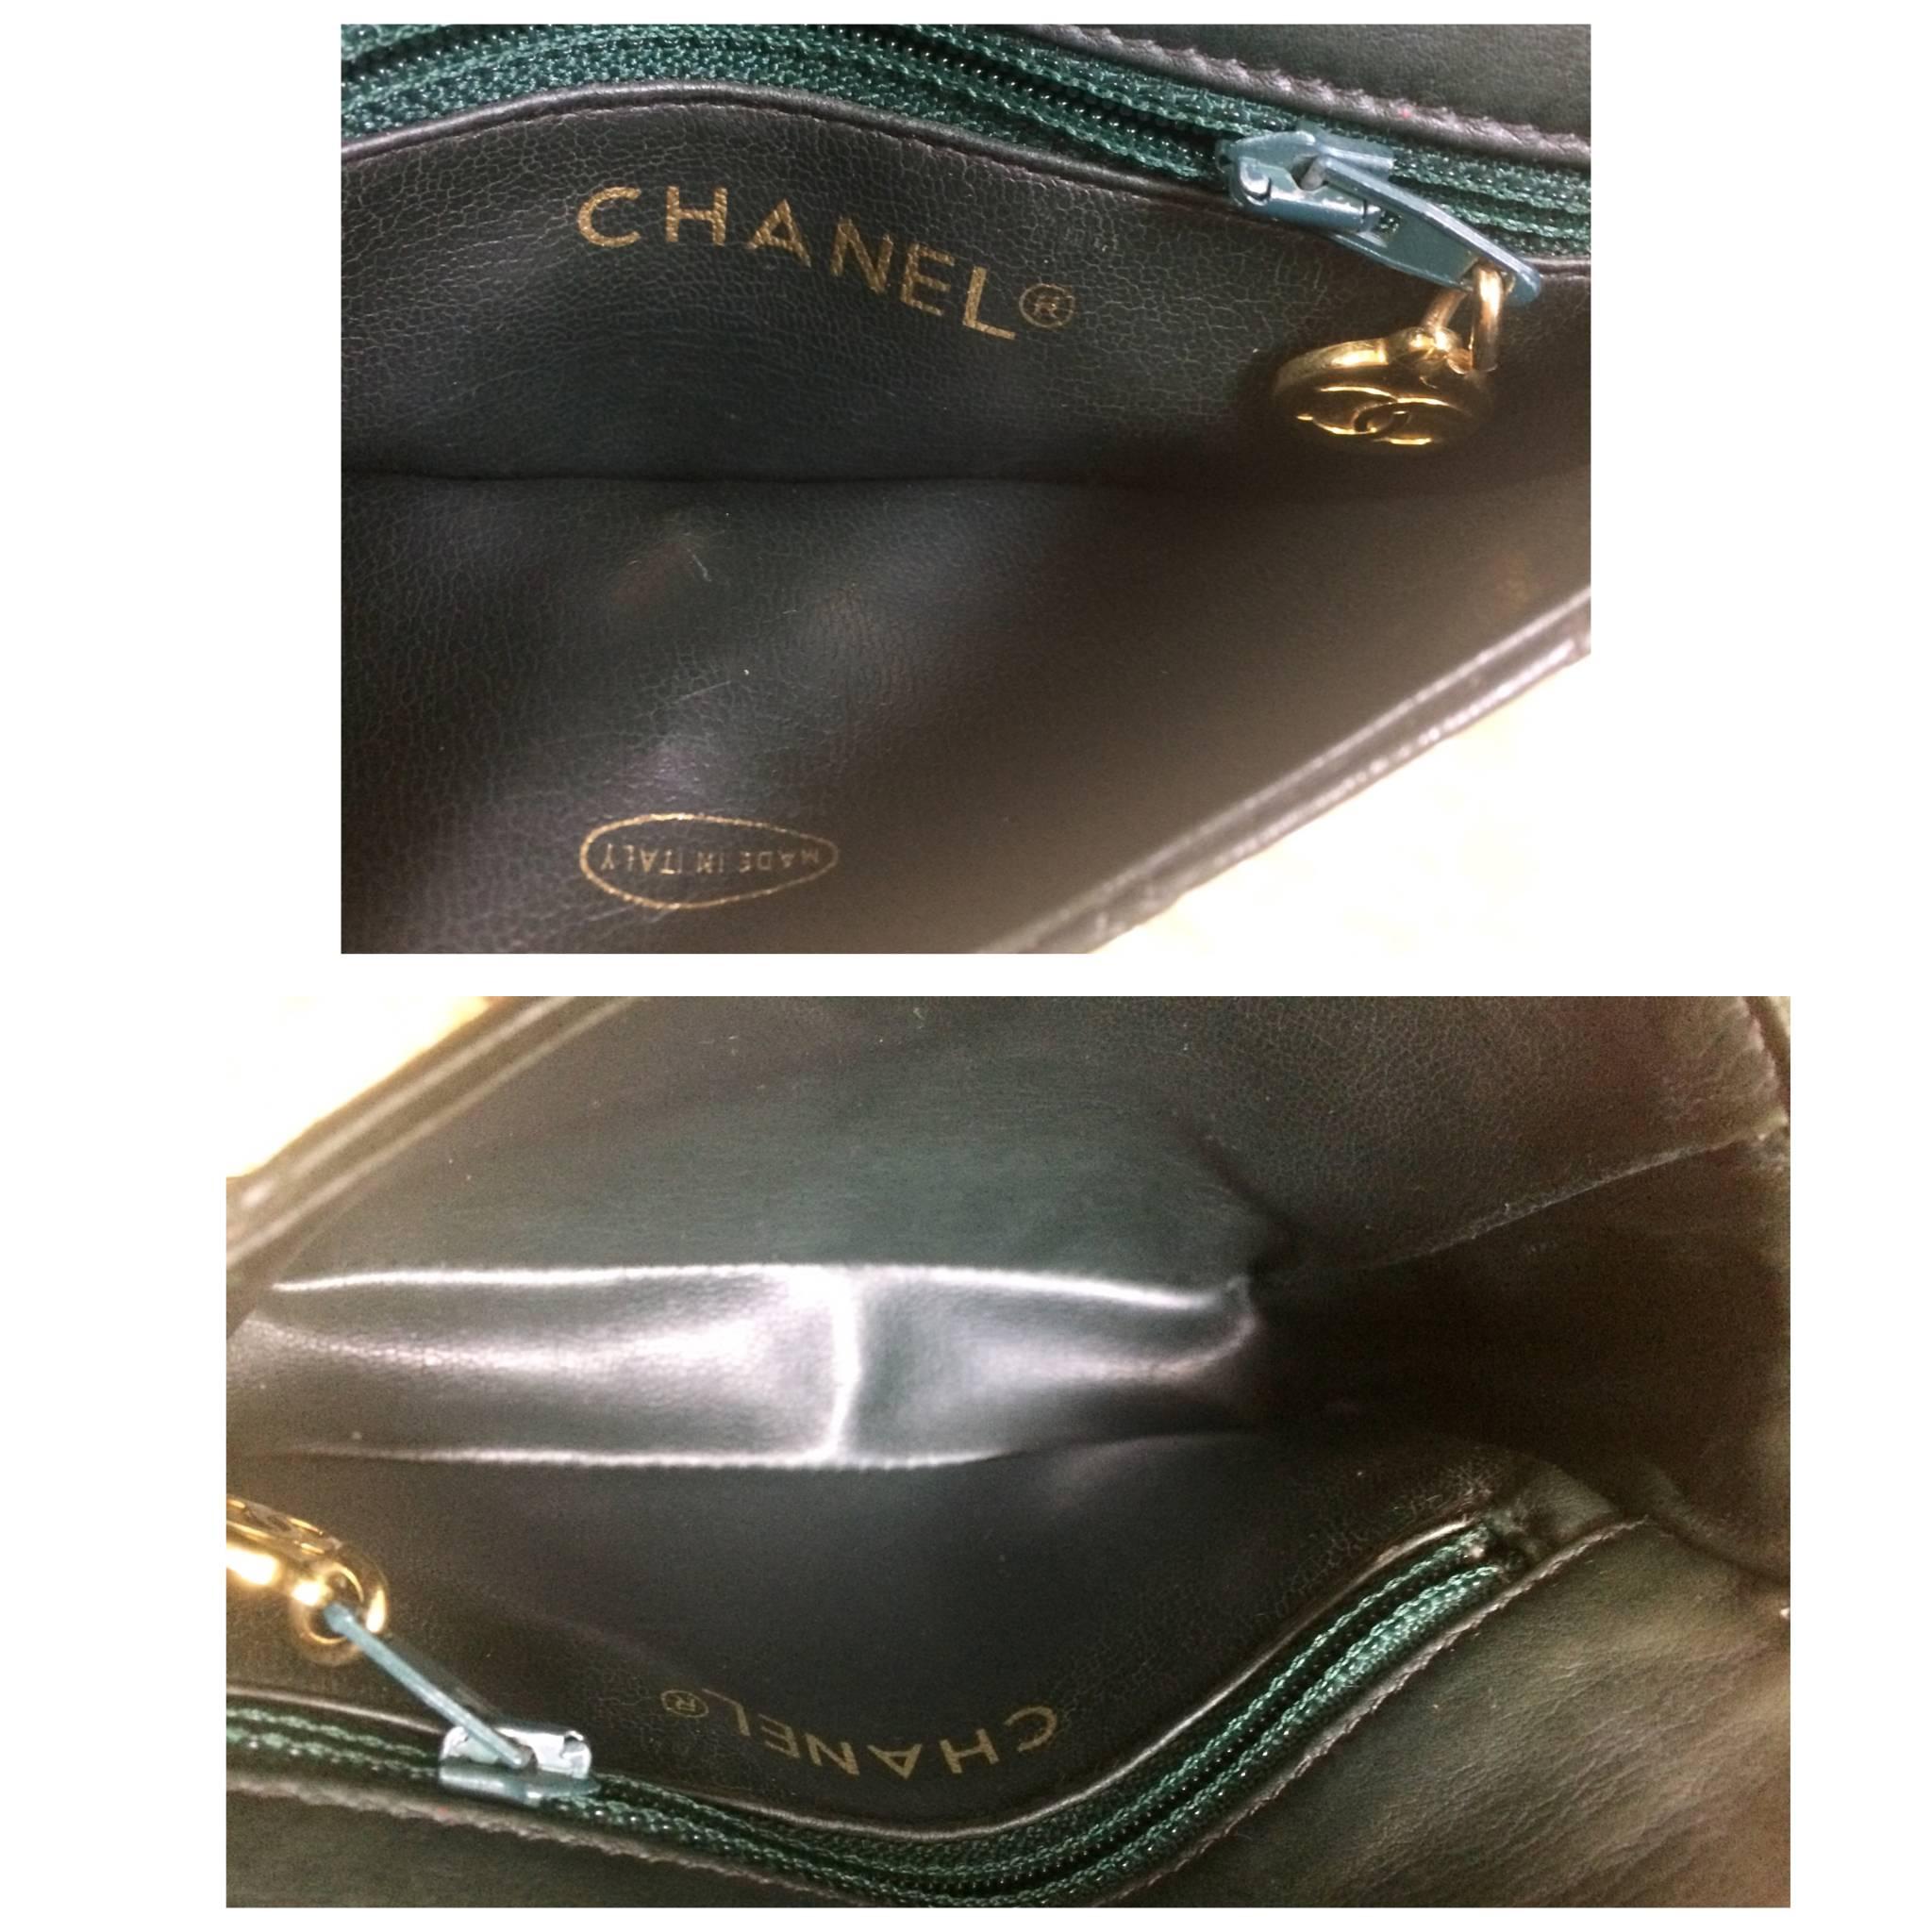 Vintage CHANEL green waist purse, fanny pack with golden chain belt. Rare color. 2